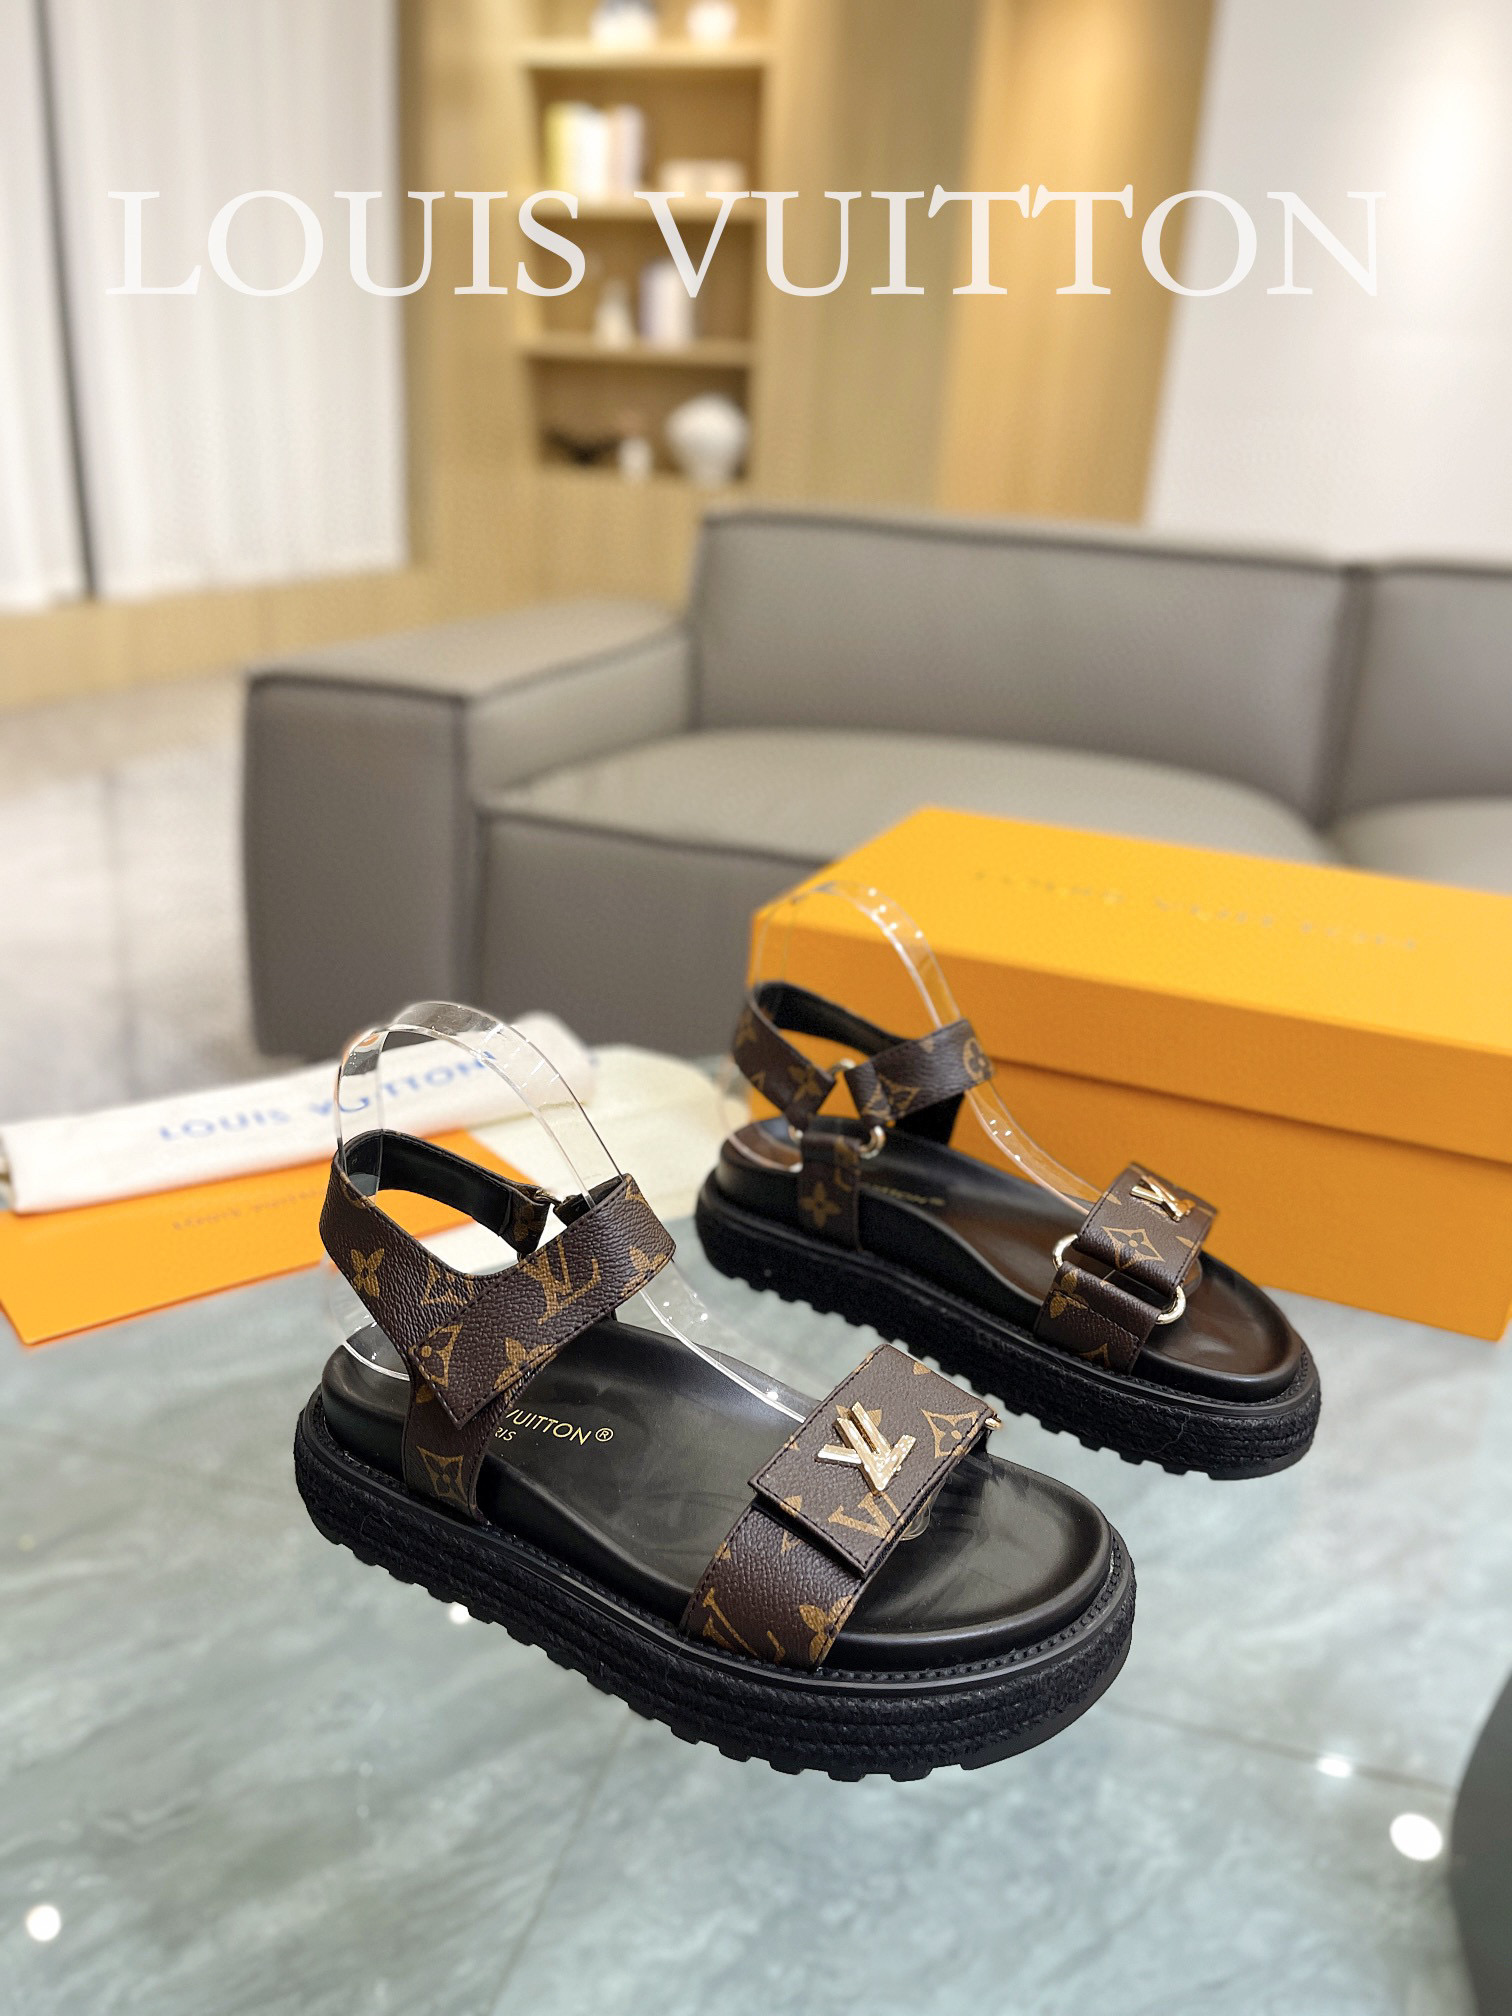 Sandals and Espadrilles Collection for Women  LOUIS VUITTON  2